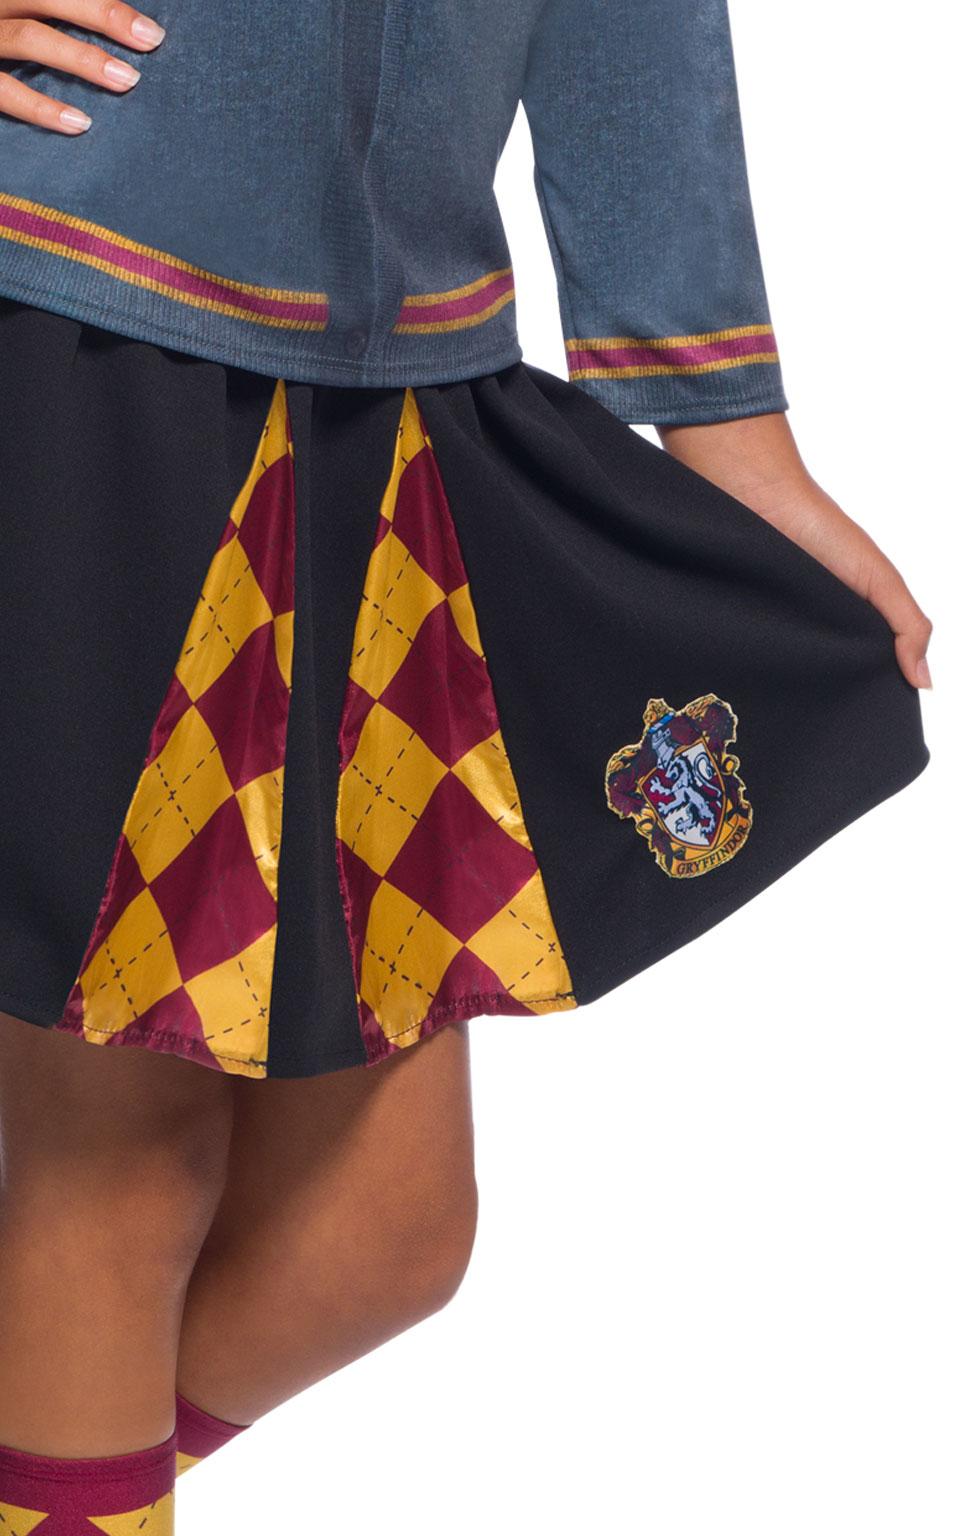 Gryffindor House Skirt for Girls by Rubies 39029 available here at Karnival Costumes online party shop